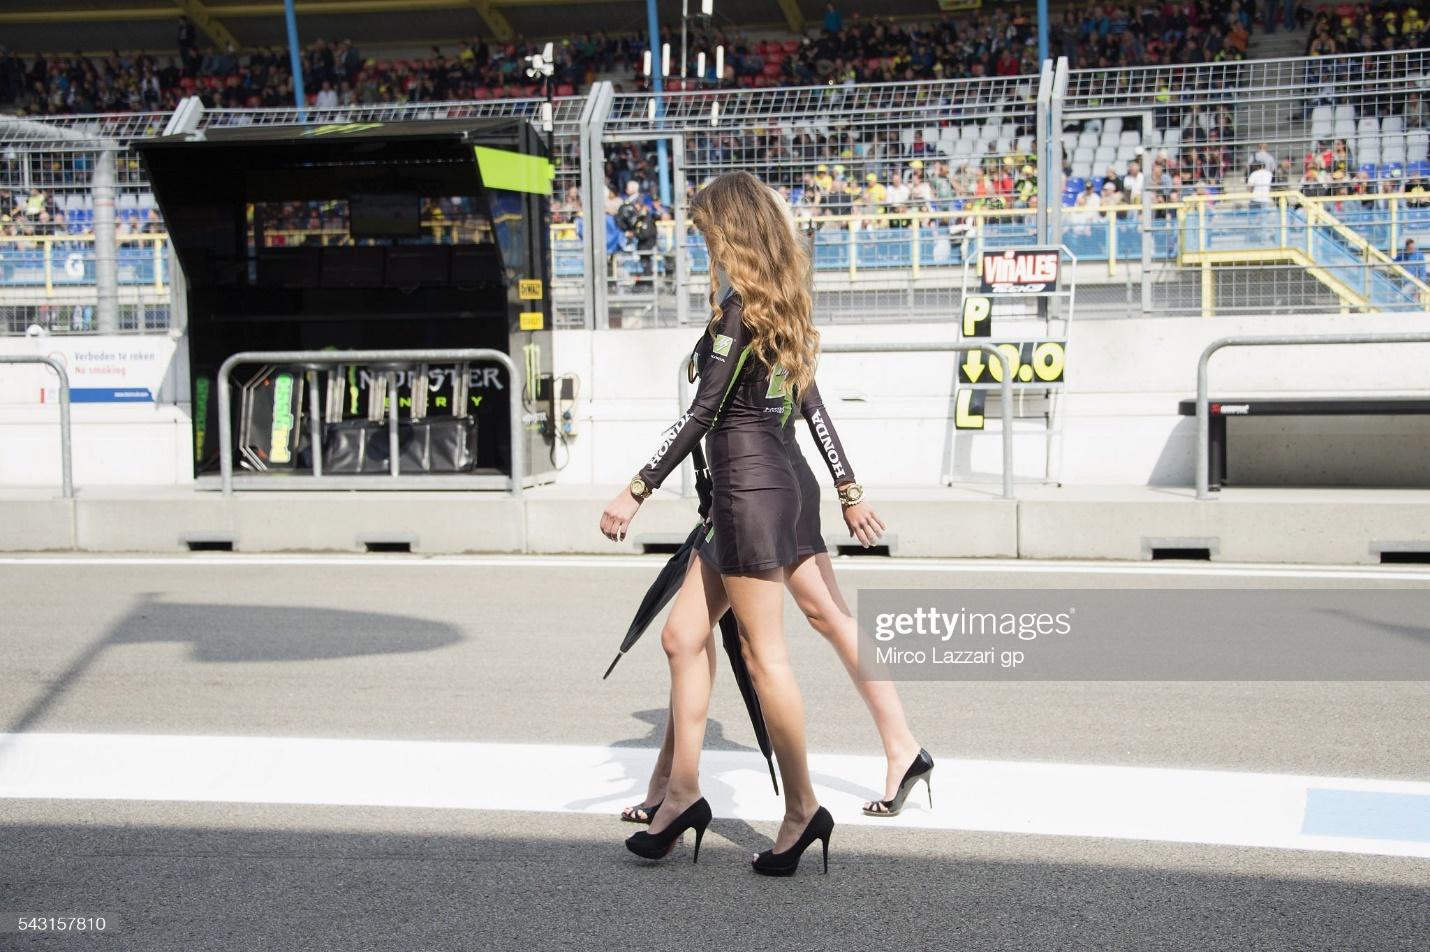 D:\Documenti\posts\posts\Women and motorsport\foto\Getty e altre\the-francesco-bagnaia-of-italy-and-aspar-team-moto3-walk-in-pit-the-picture-id543157810.jpg